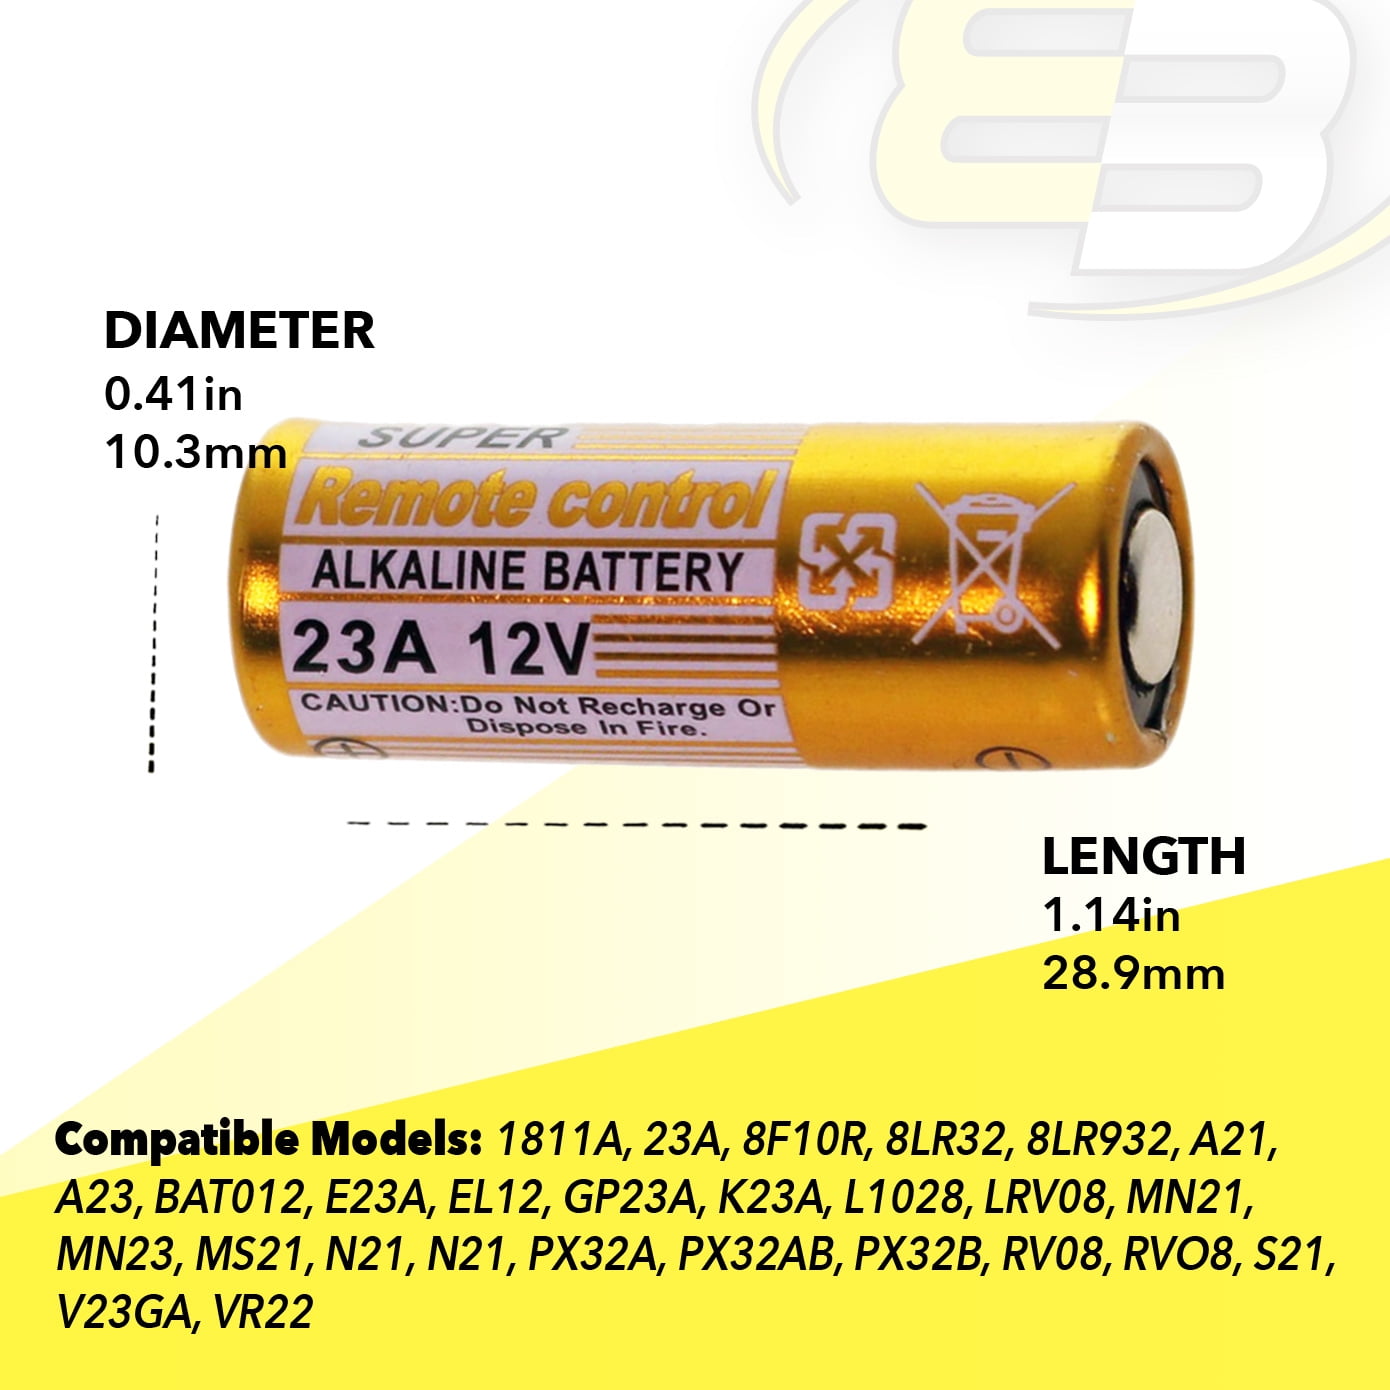 China 12V L1028 A23 Alkaline Battery From Top 3 Supplier Suppliers &  Manufacturers & Factory - Wholesale Price - WinPow